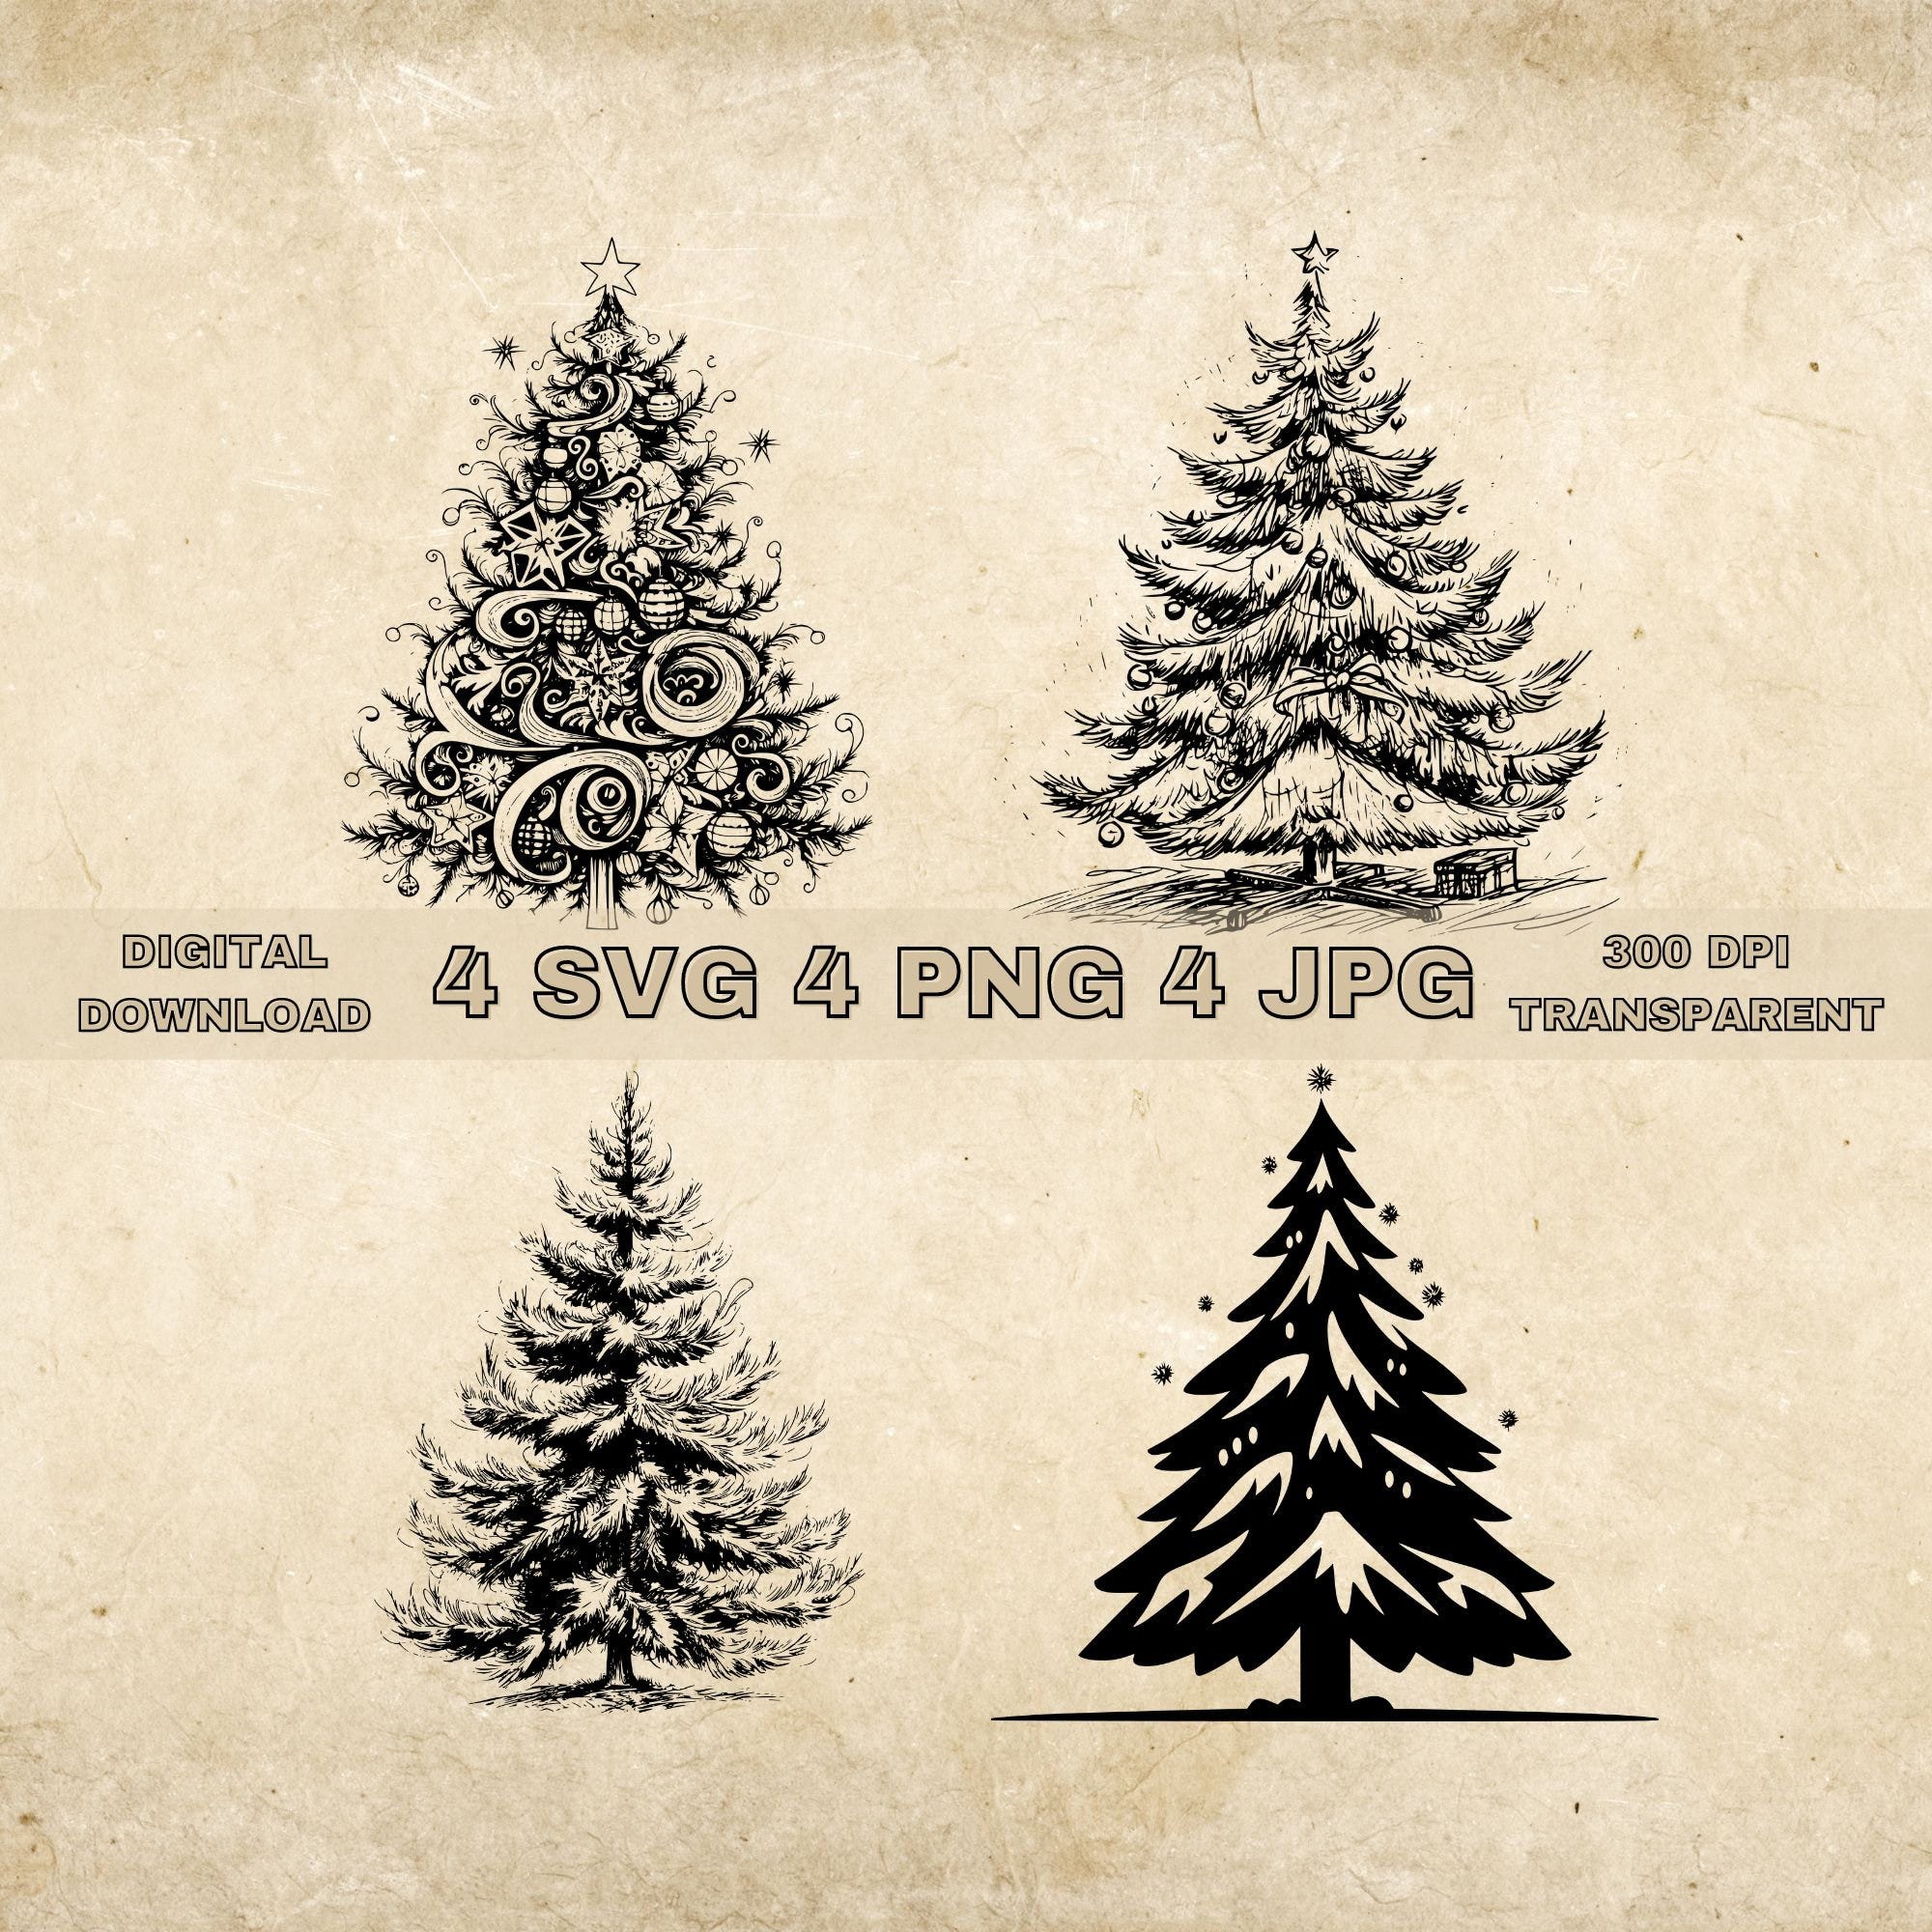 Christmas Tree SVG Bundle, PNG, Decorative Christmas Clipart, Hand Drawn Winter Trees Vector Illustration, SVG Files For Laser Engraving